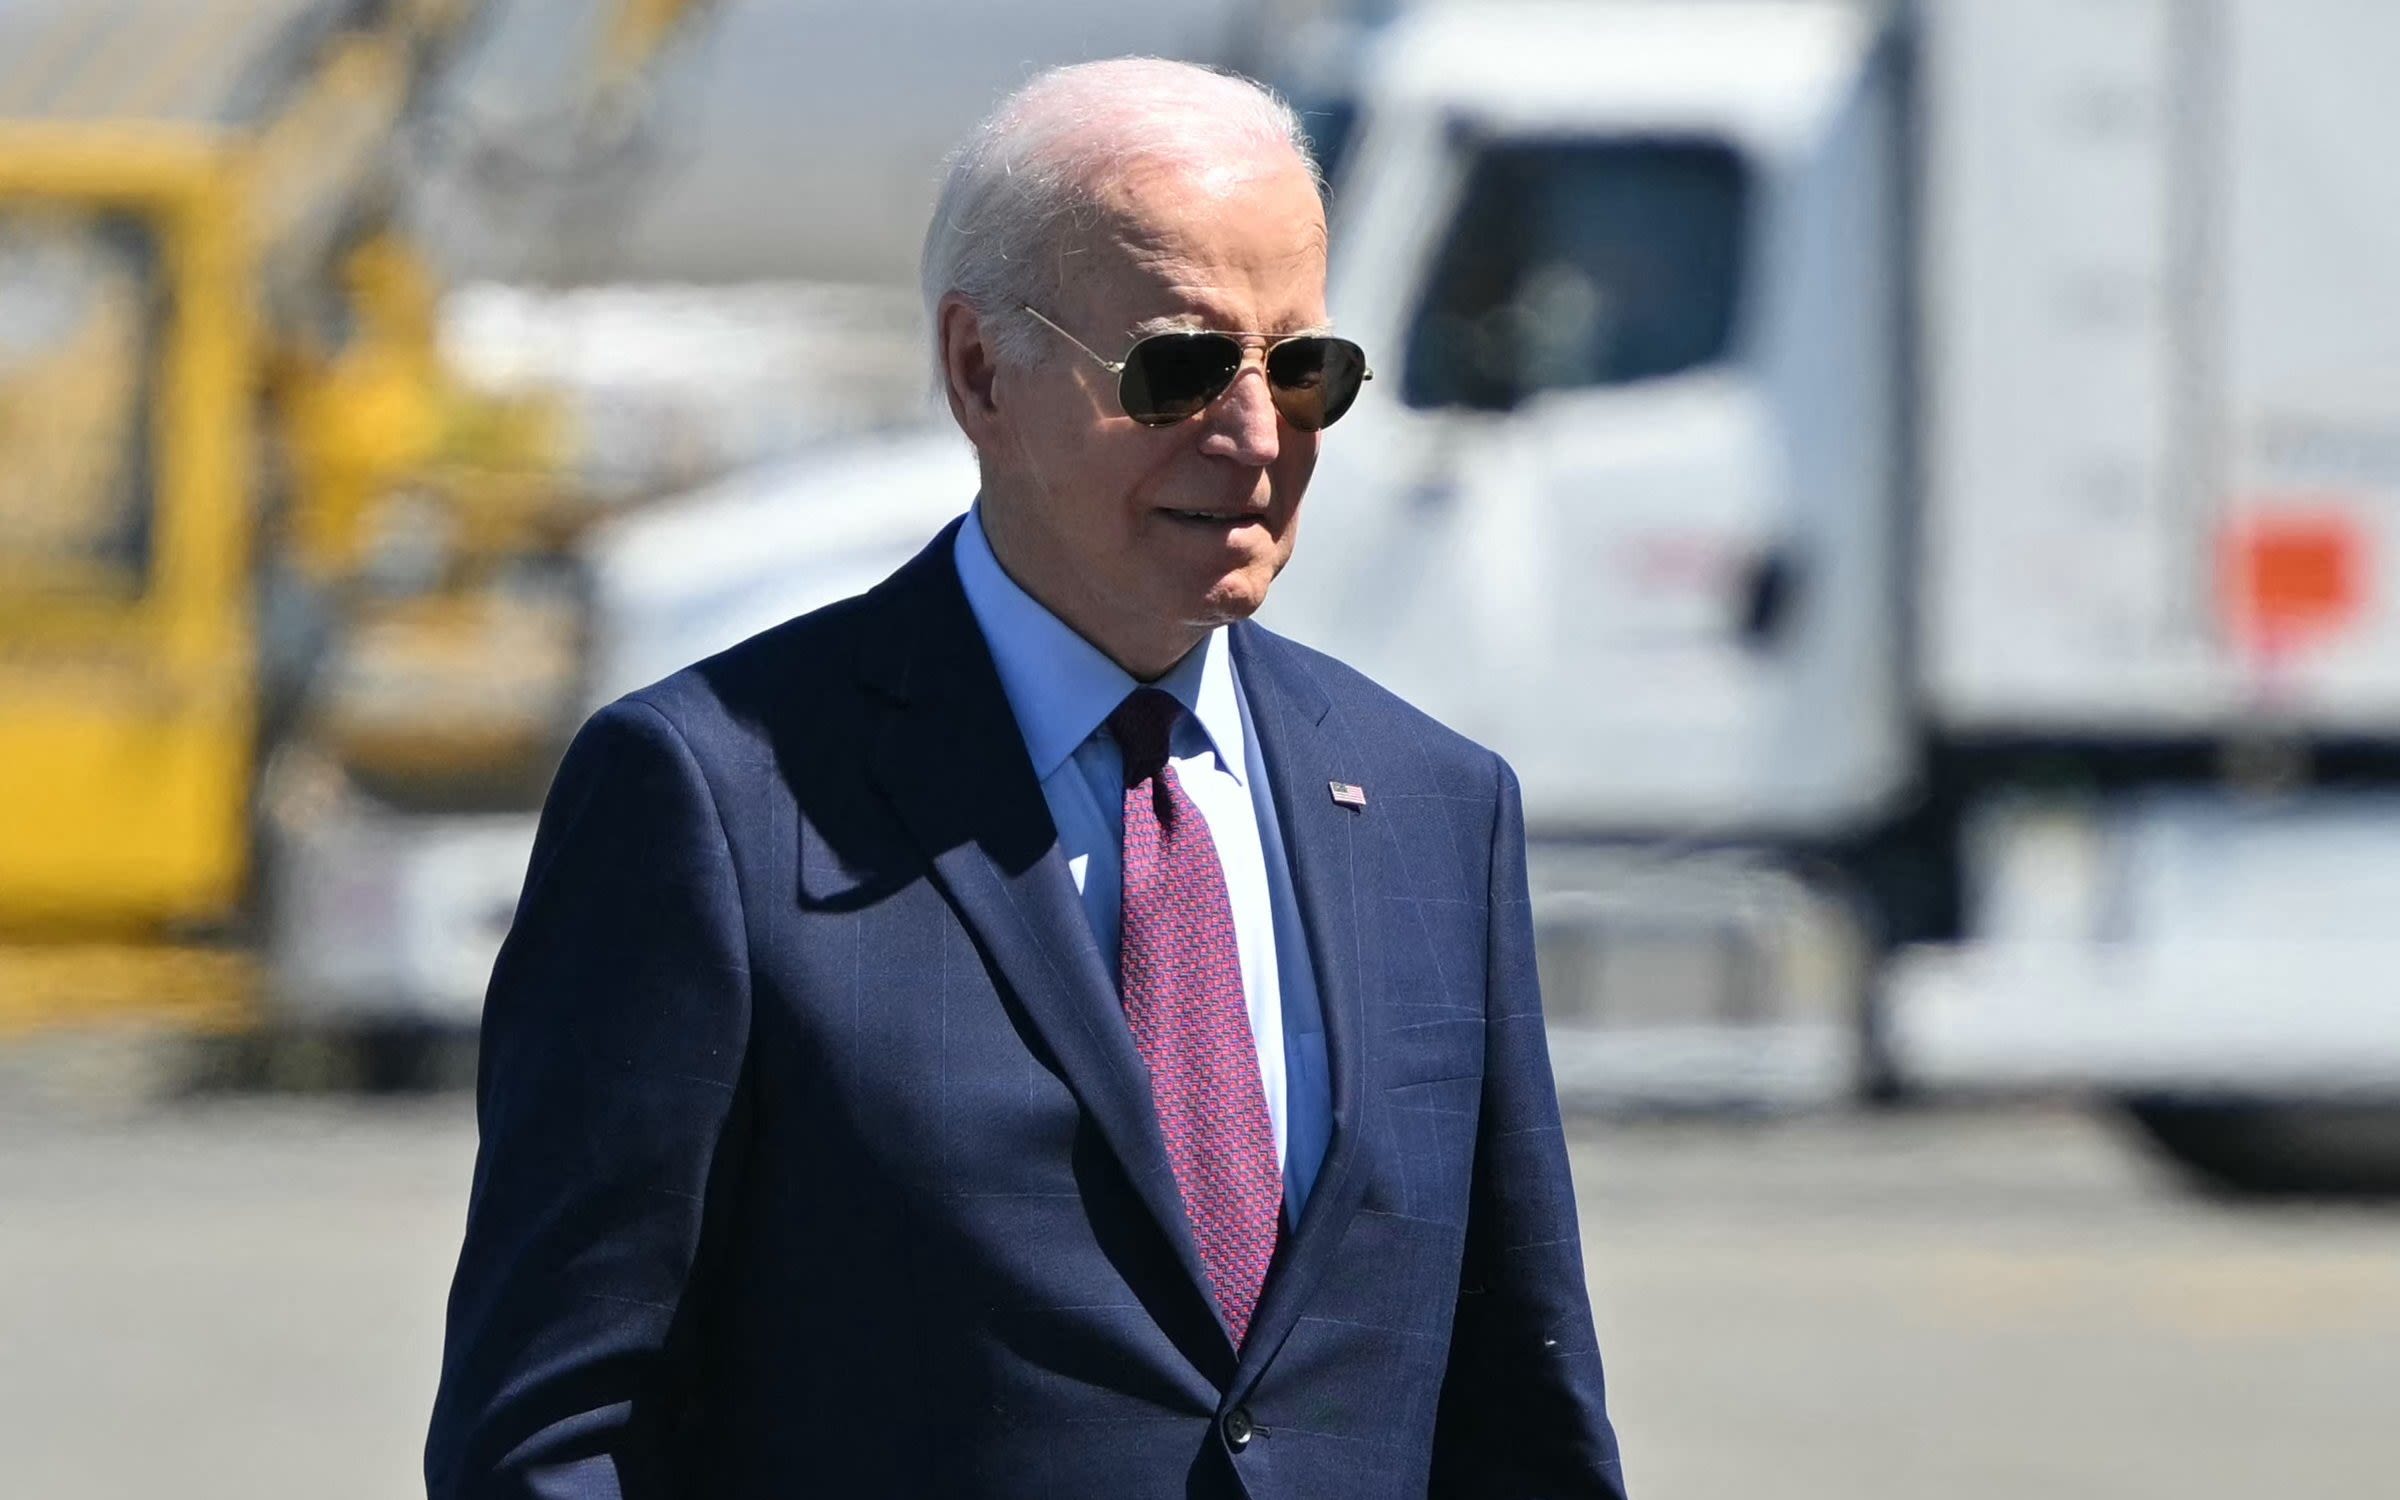 Joe Biden has found a new way for electric cars to kill the economy